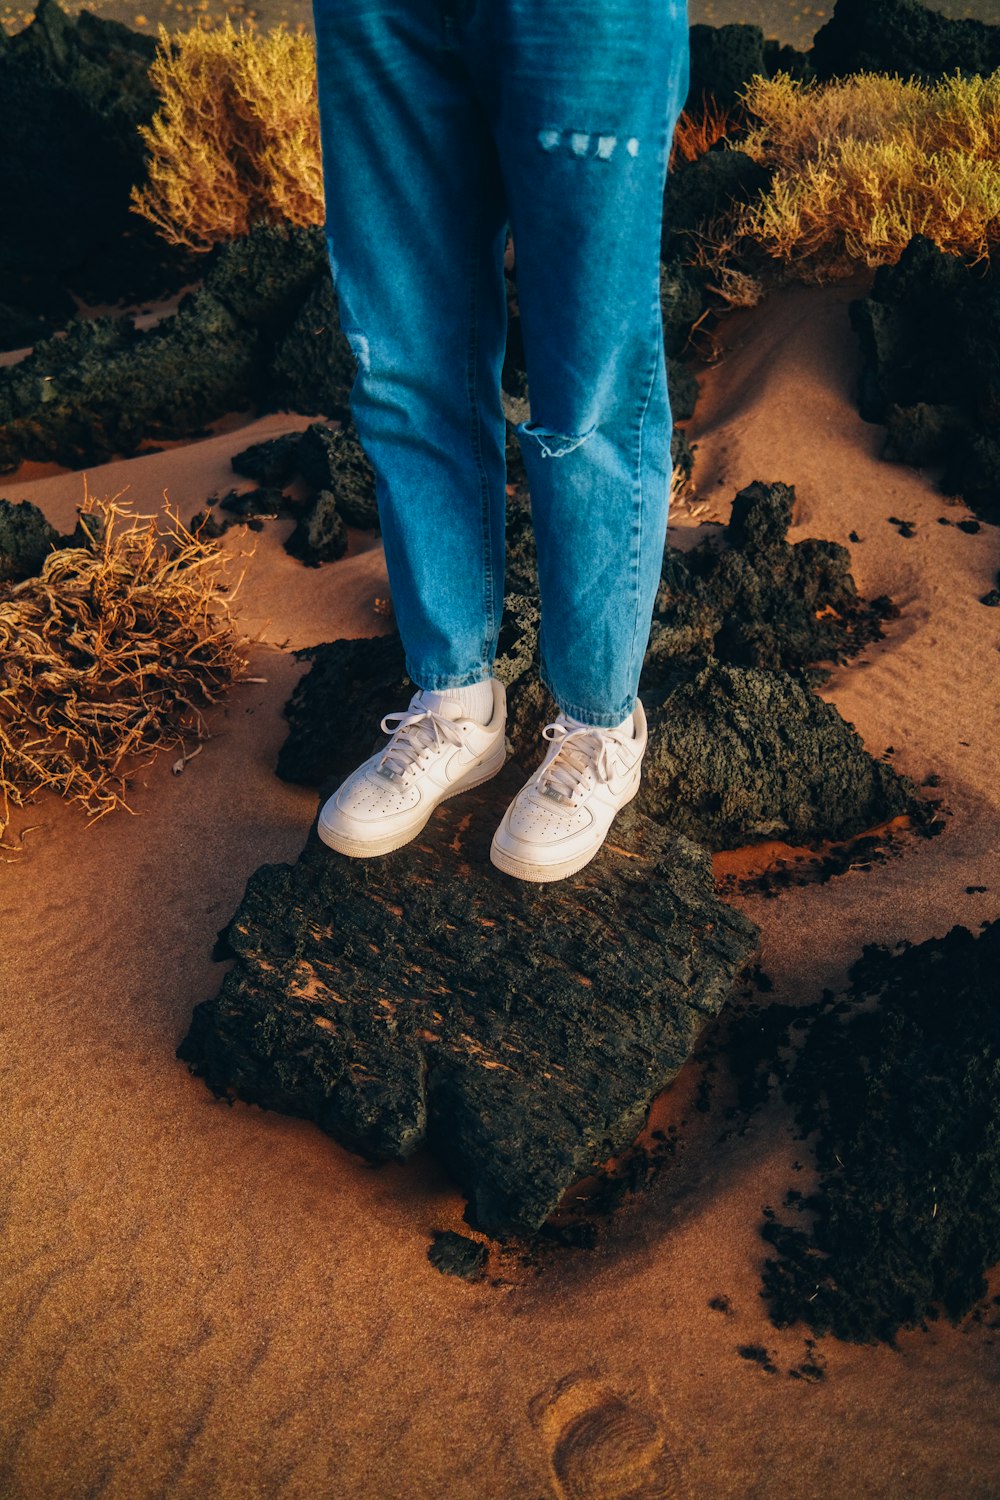 a person's legs and feet on a rock